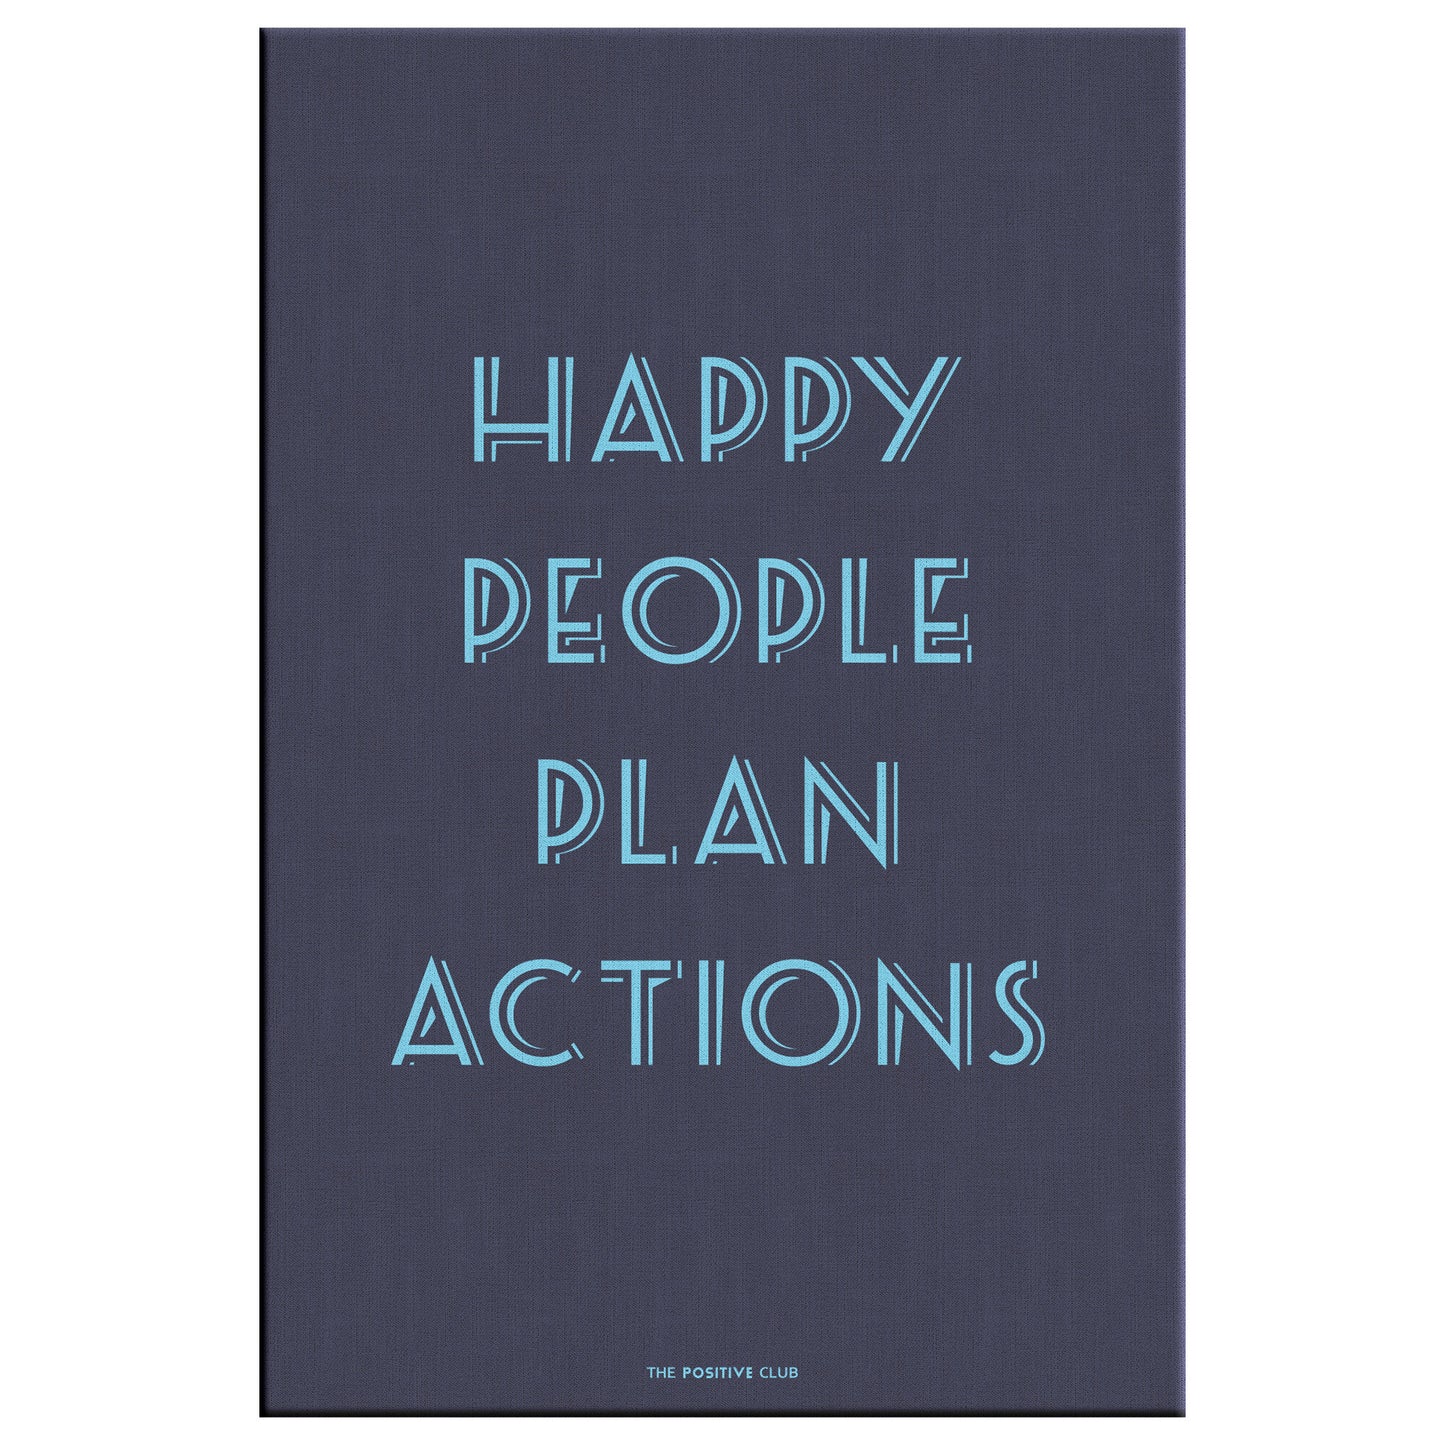 HAPPY PEOPLE PLAN ACTIONS